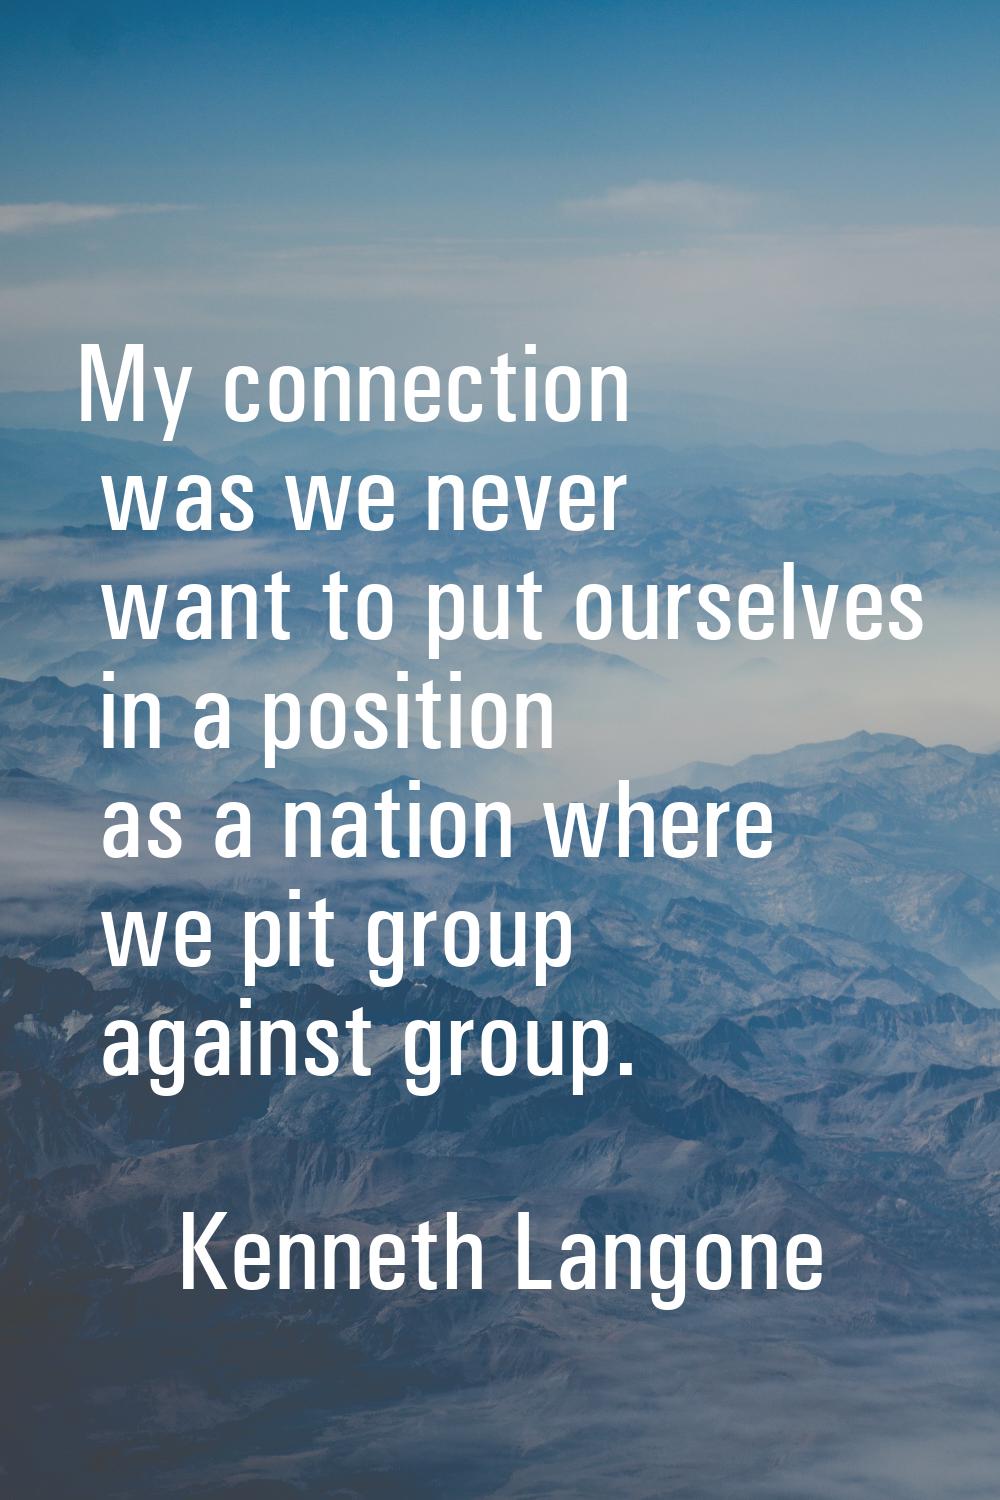 My connection was we never want to put ourselves in a position as a nation where we pit group again